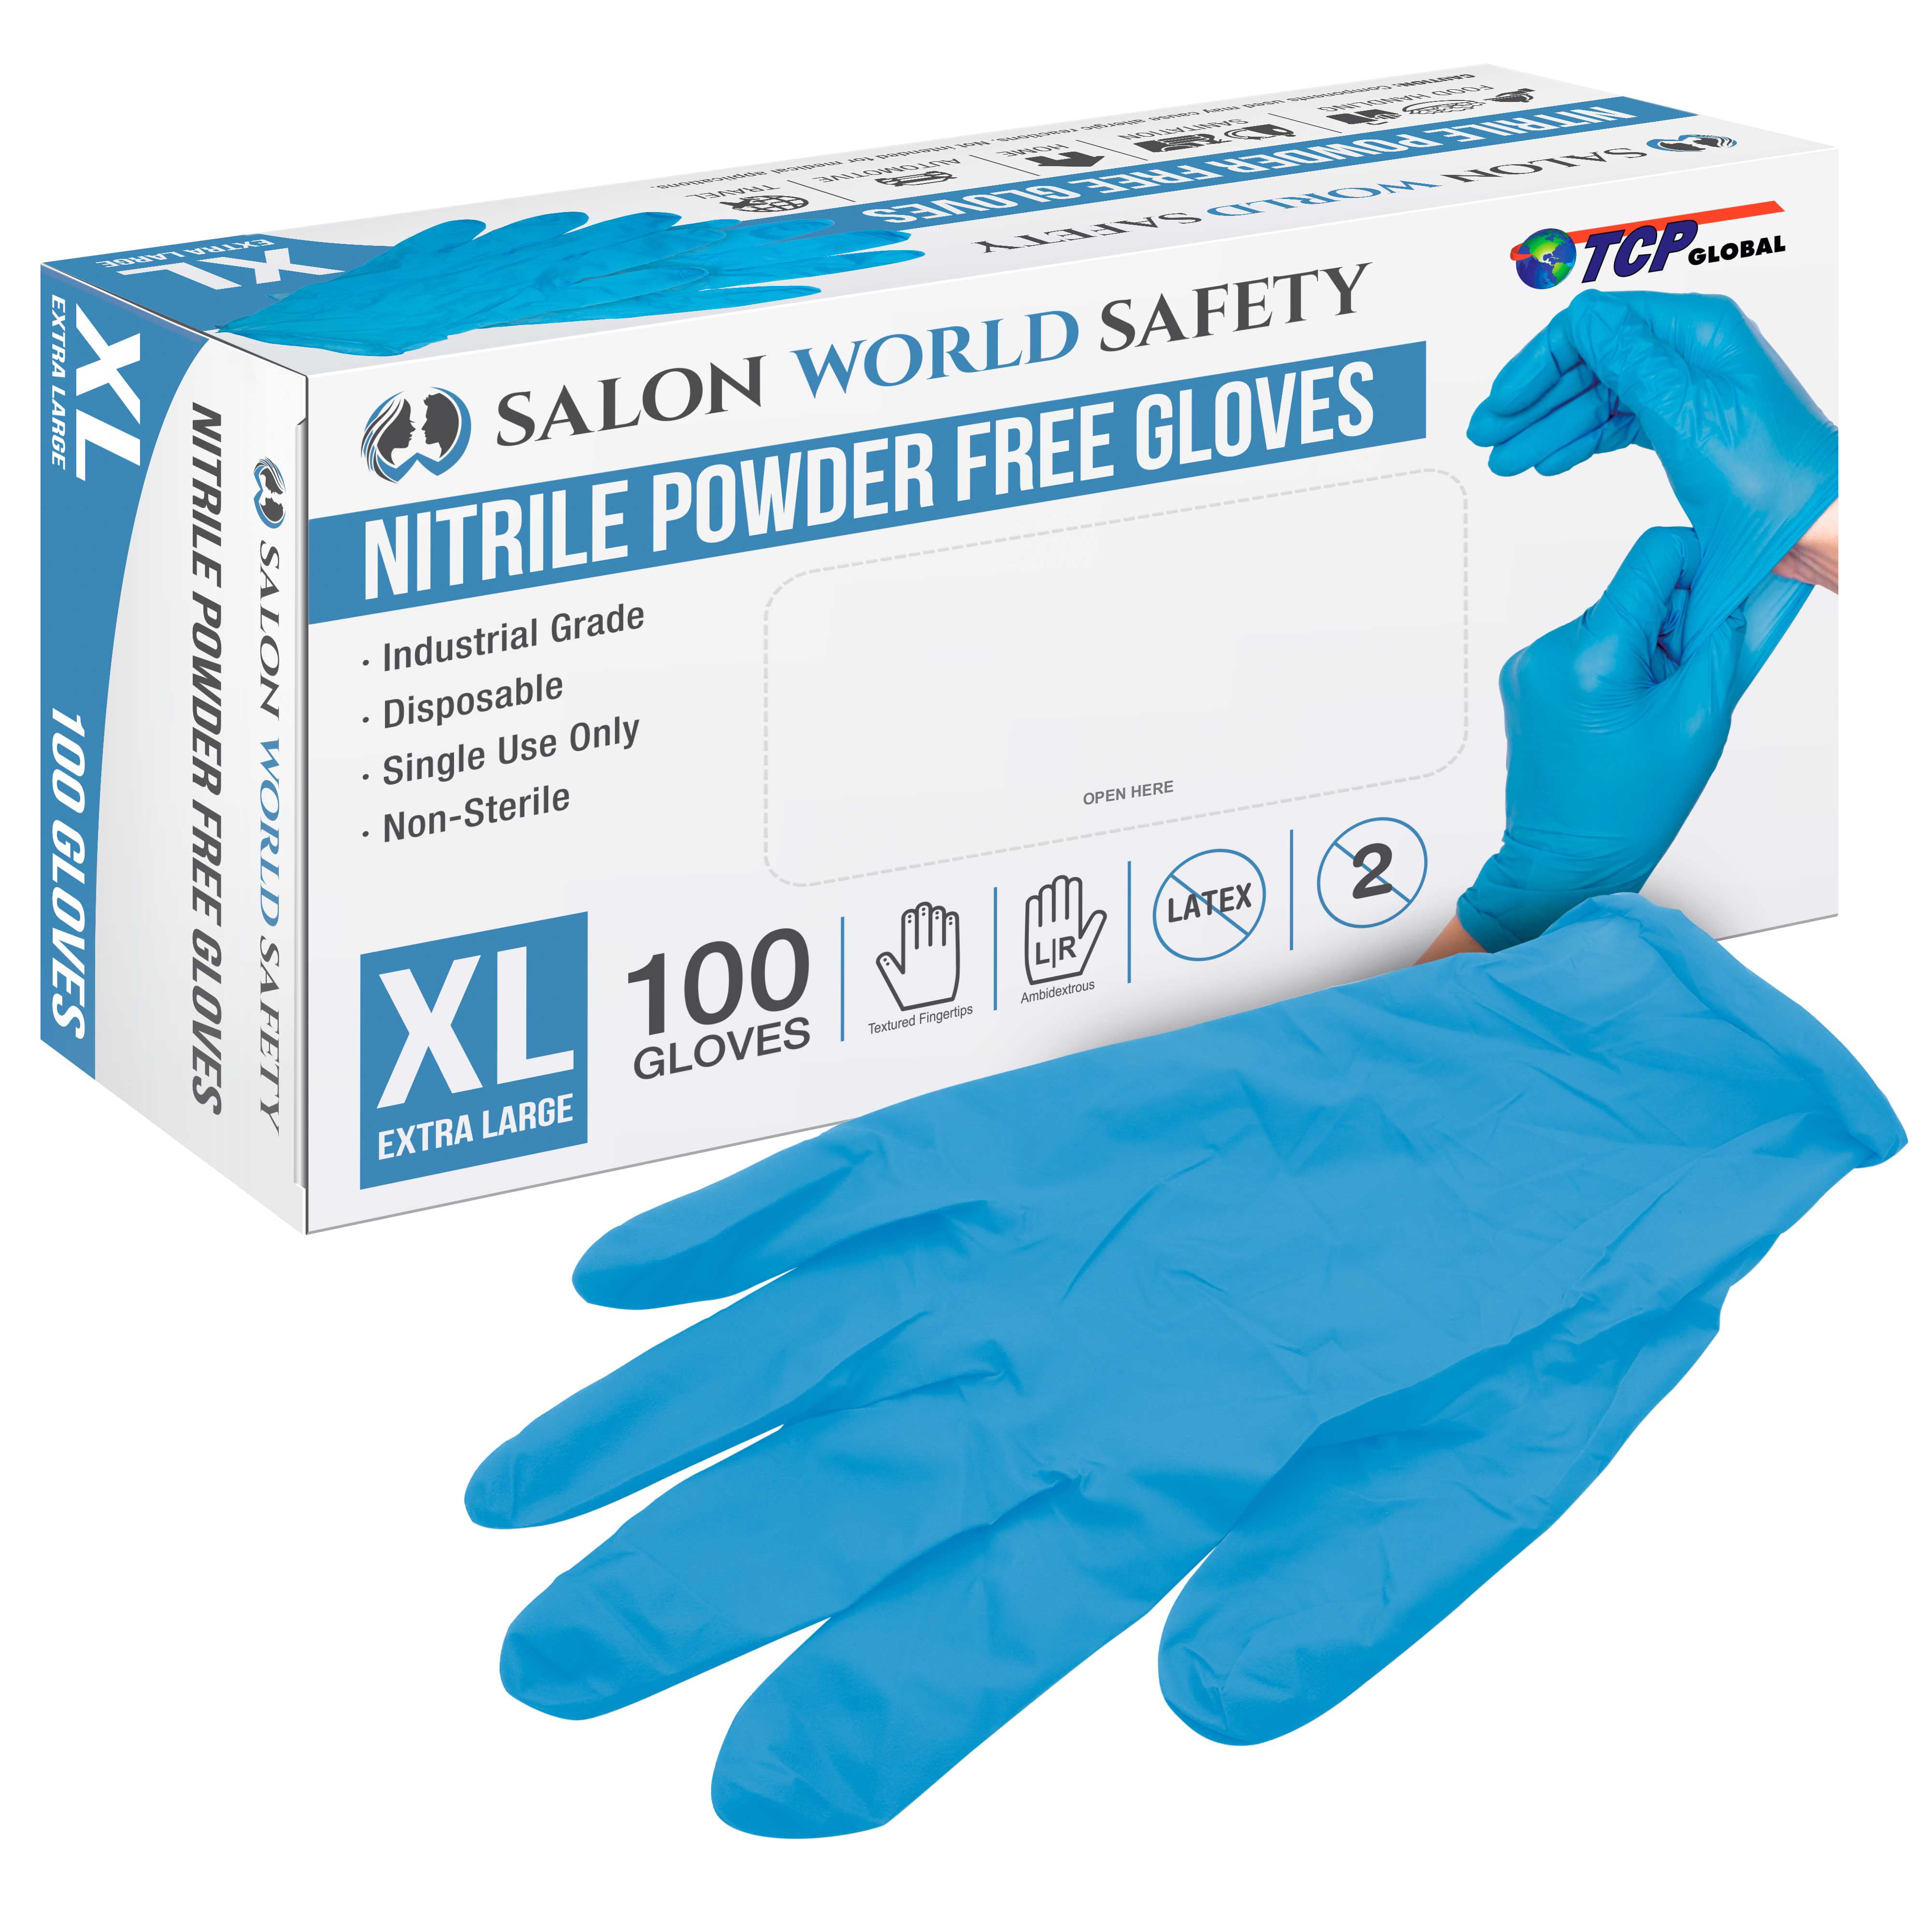 BLUE DISPOSABLE NITRILE GLOVES LARGE SIZE L PPE LATEX & POWDER FREE SAFETY 